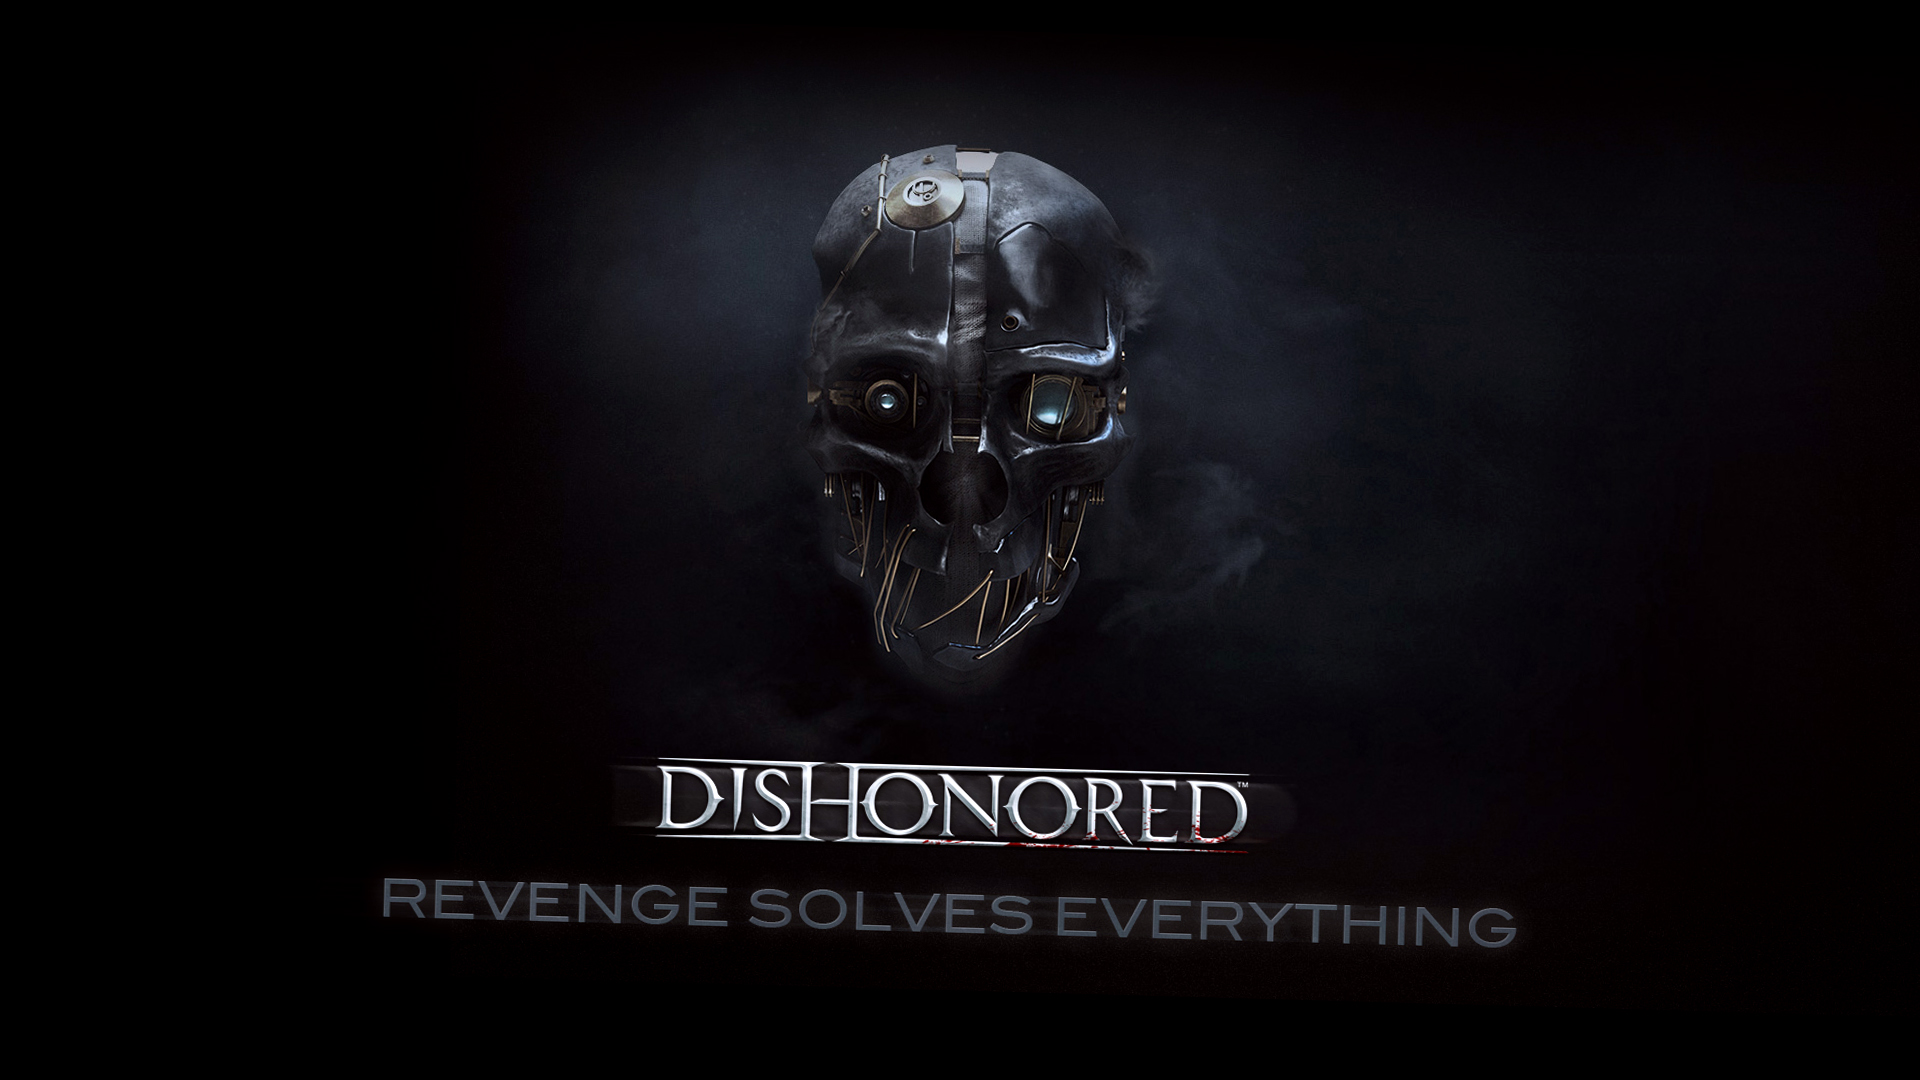 Dishonored Cover Game Wallpaper